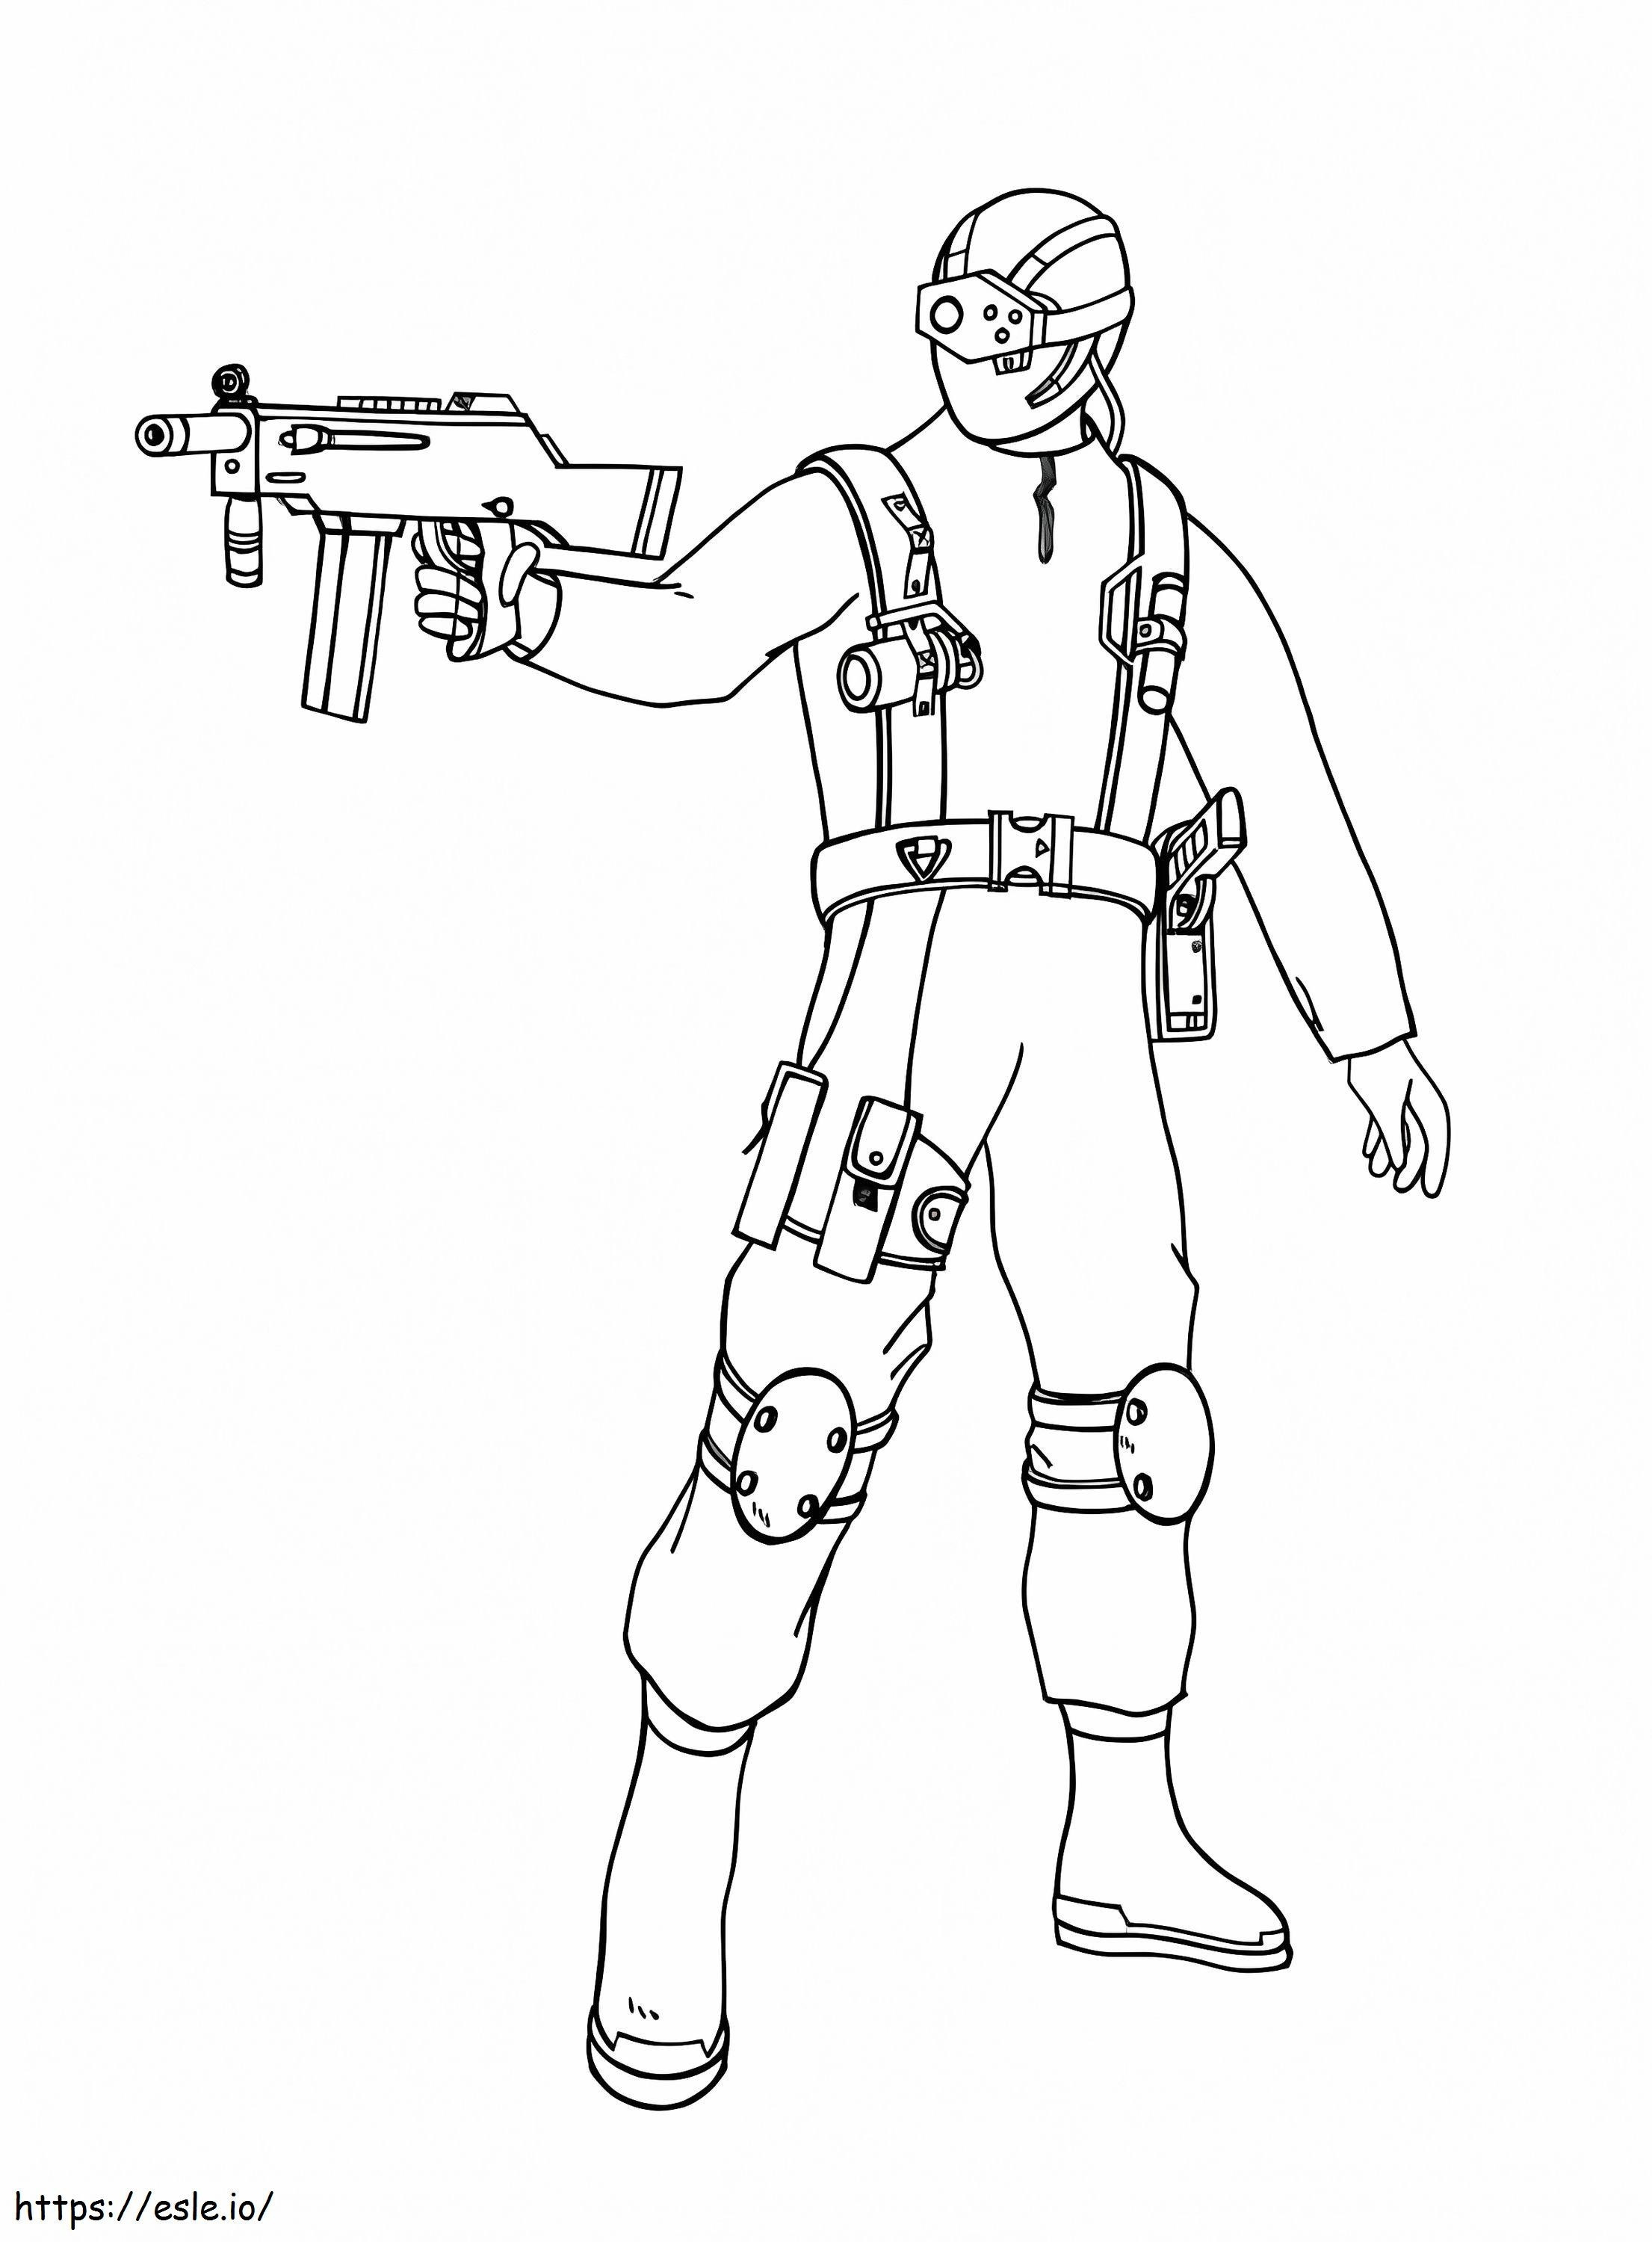 Shooting Soldier coloring page